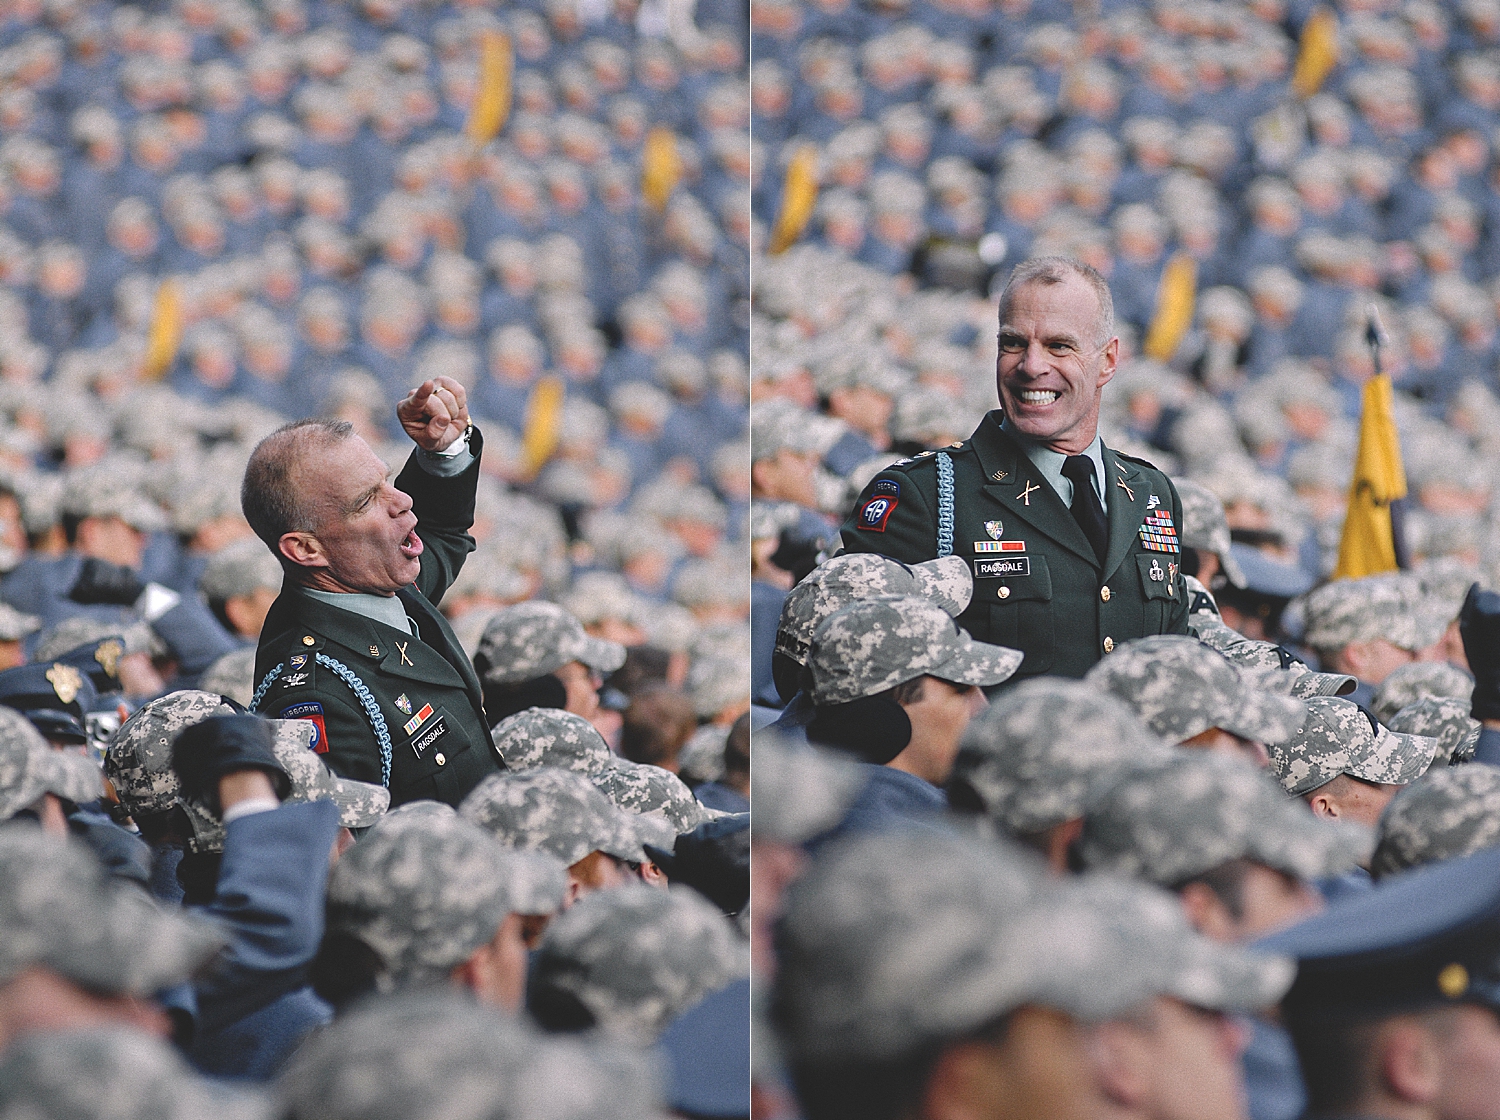 17-brass-cheers-for-army.jpg